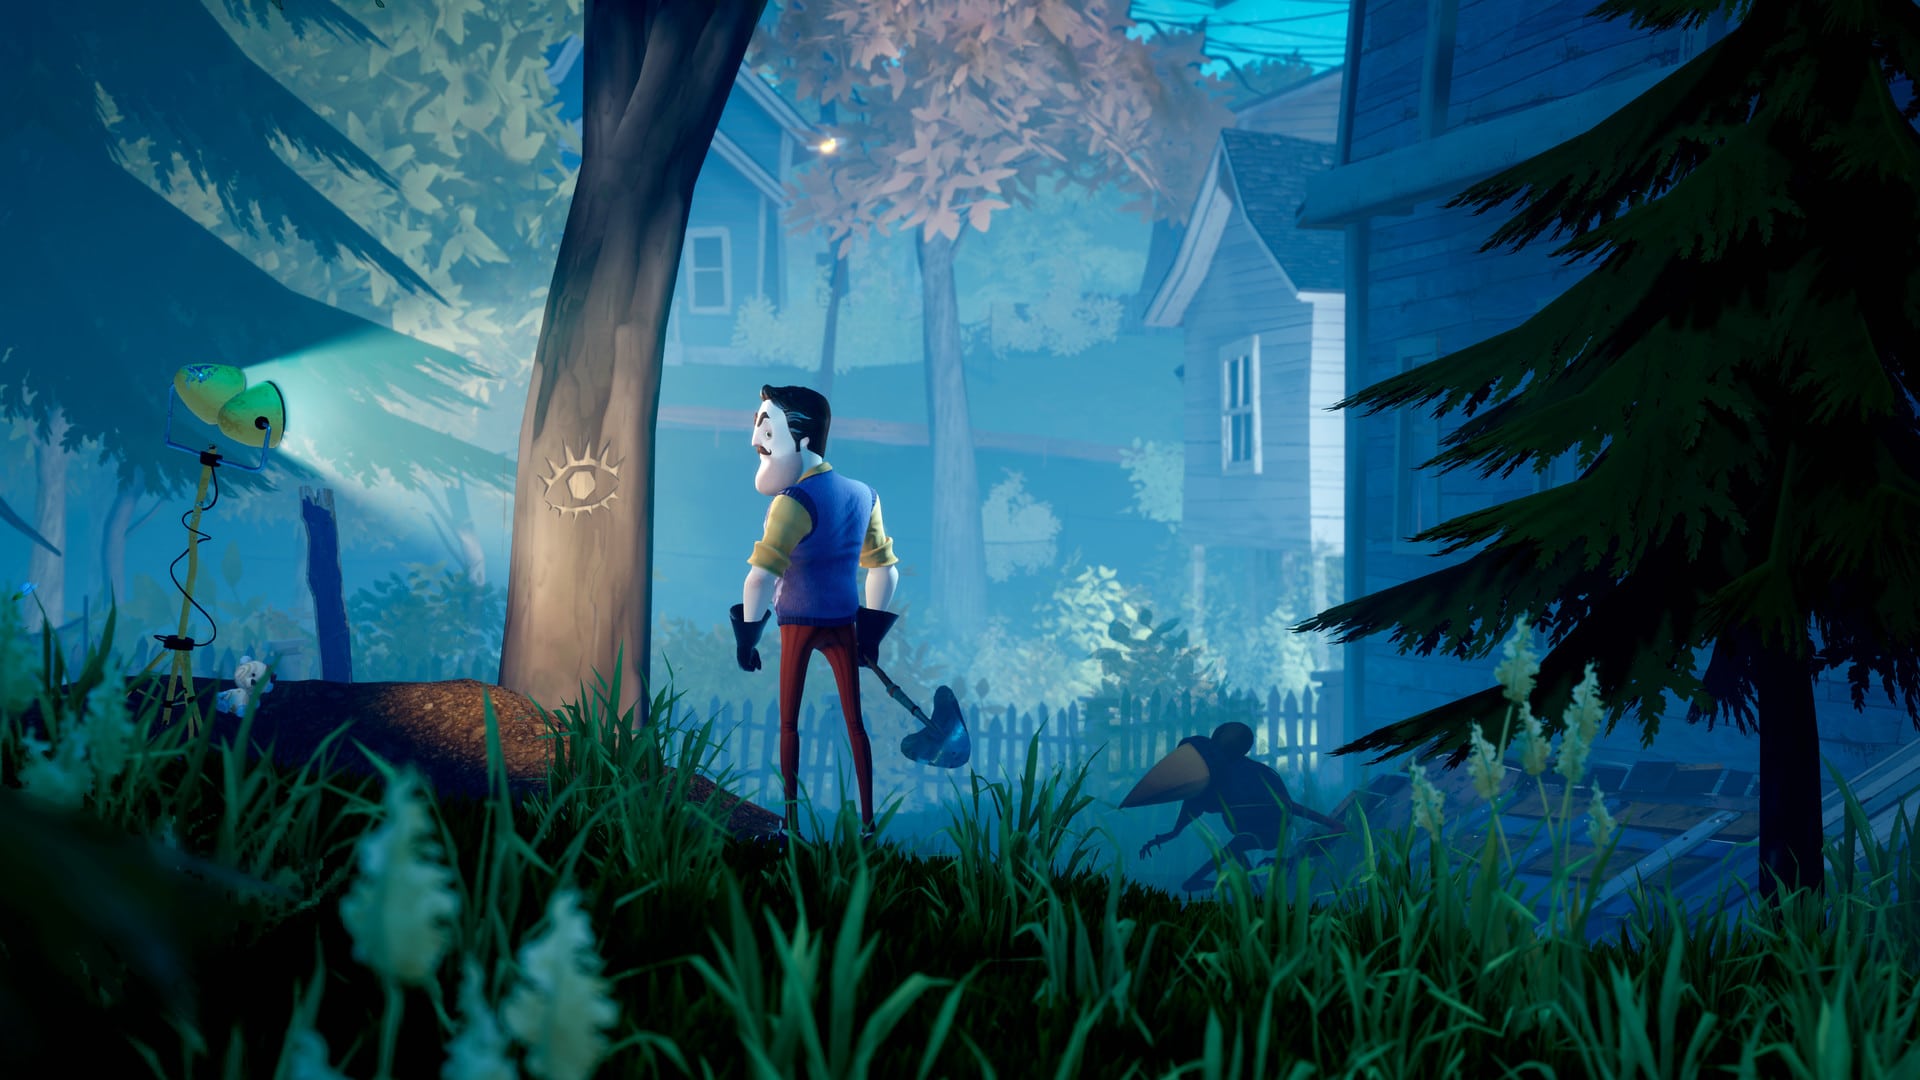 Hello Neighbor 2 Mobile Android Apk Full Version Game Free Download